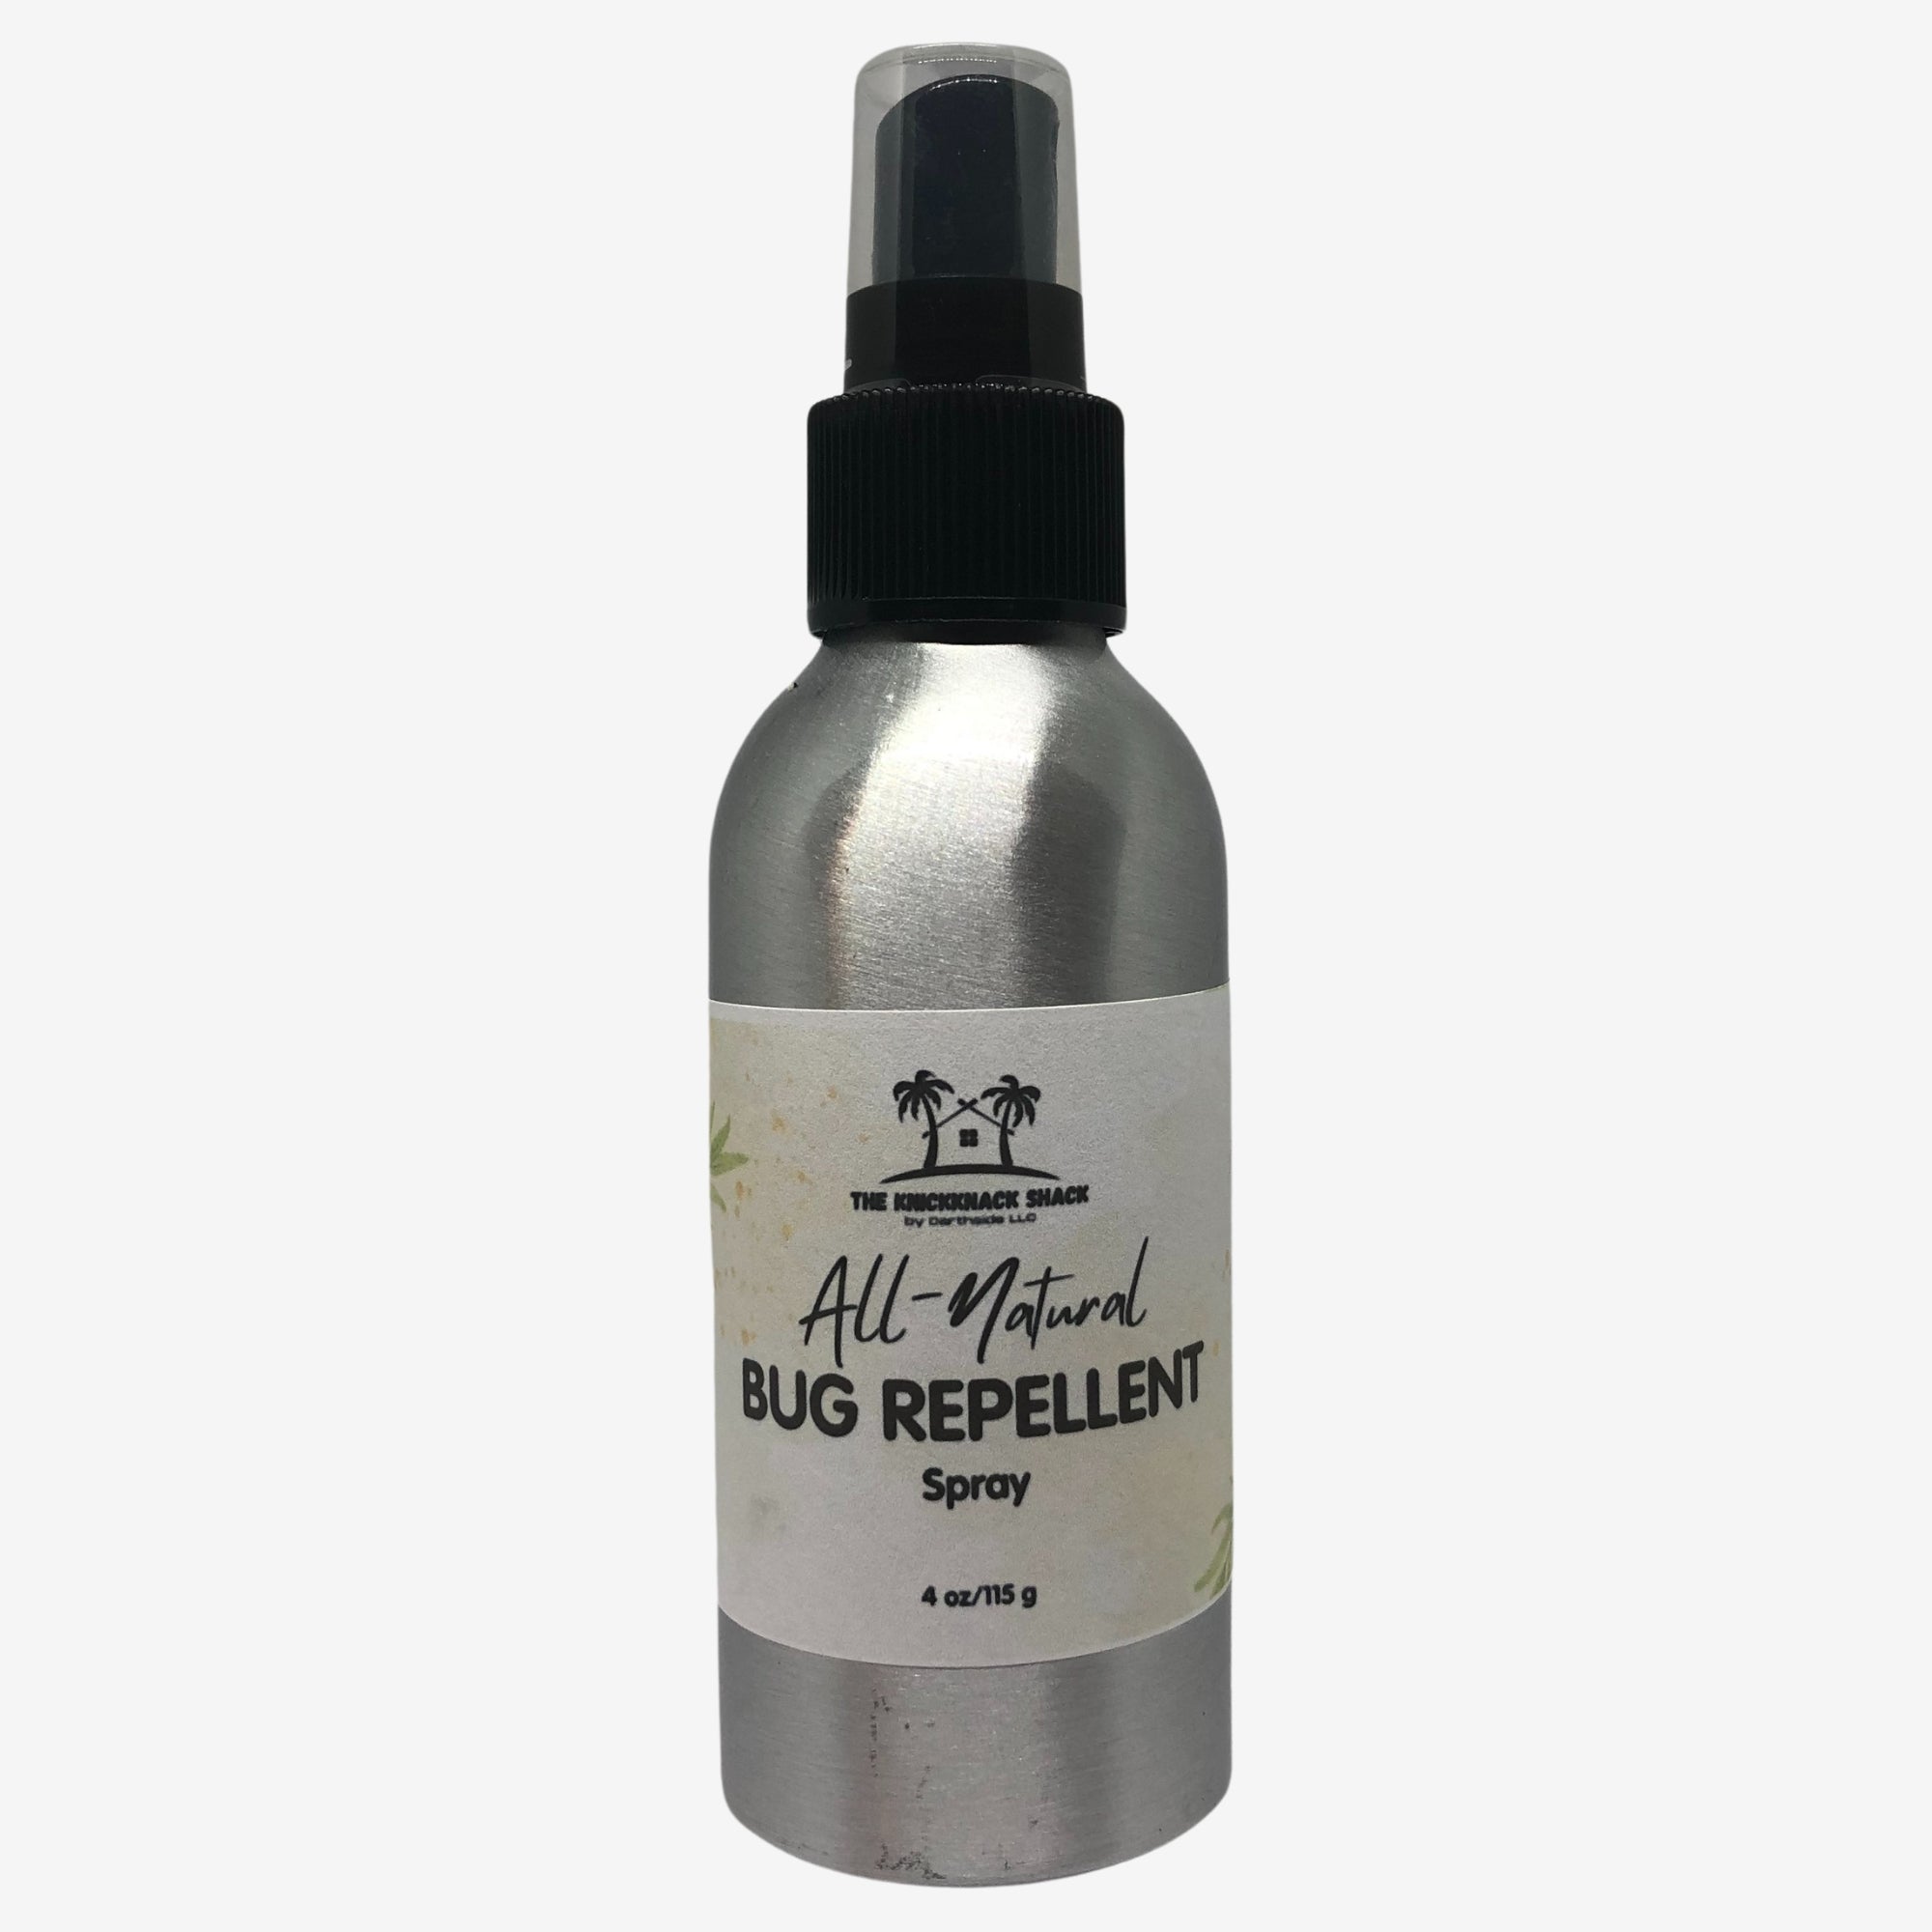 All-Natural Bug Repellent Spray